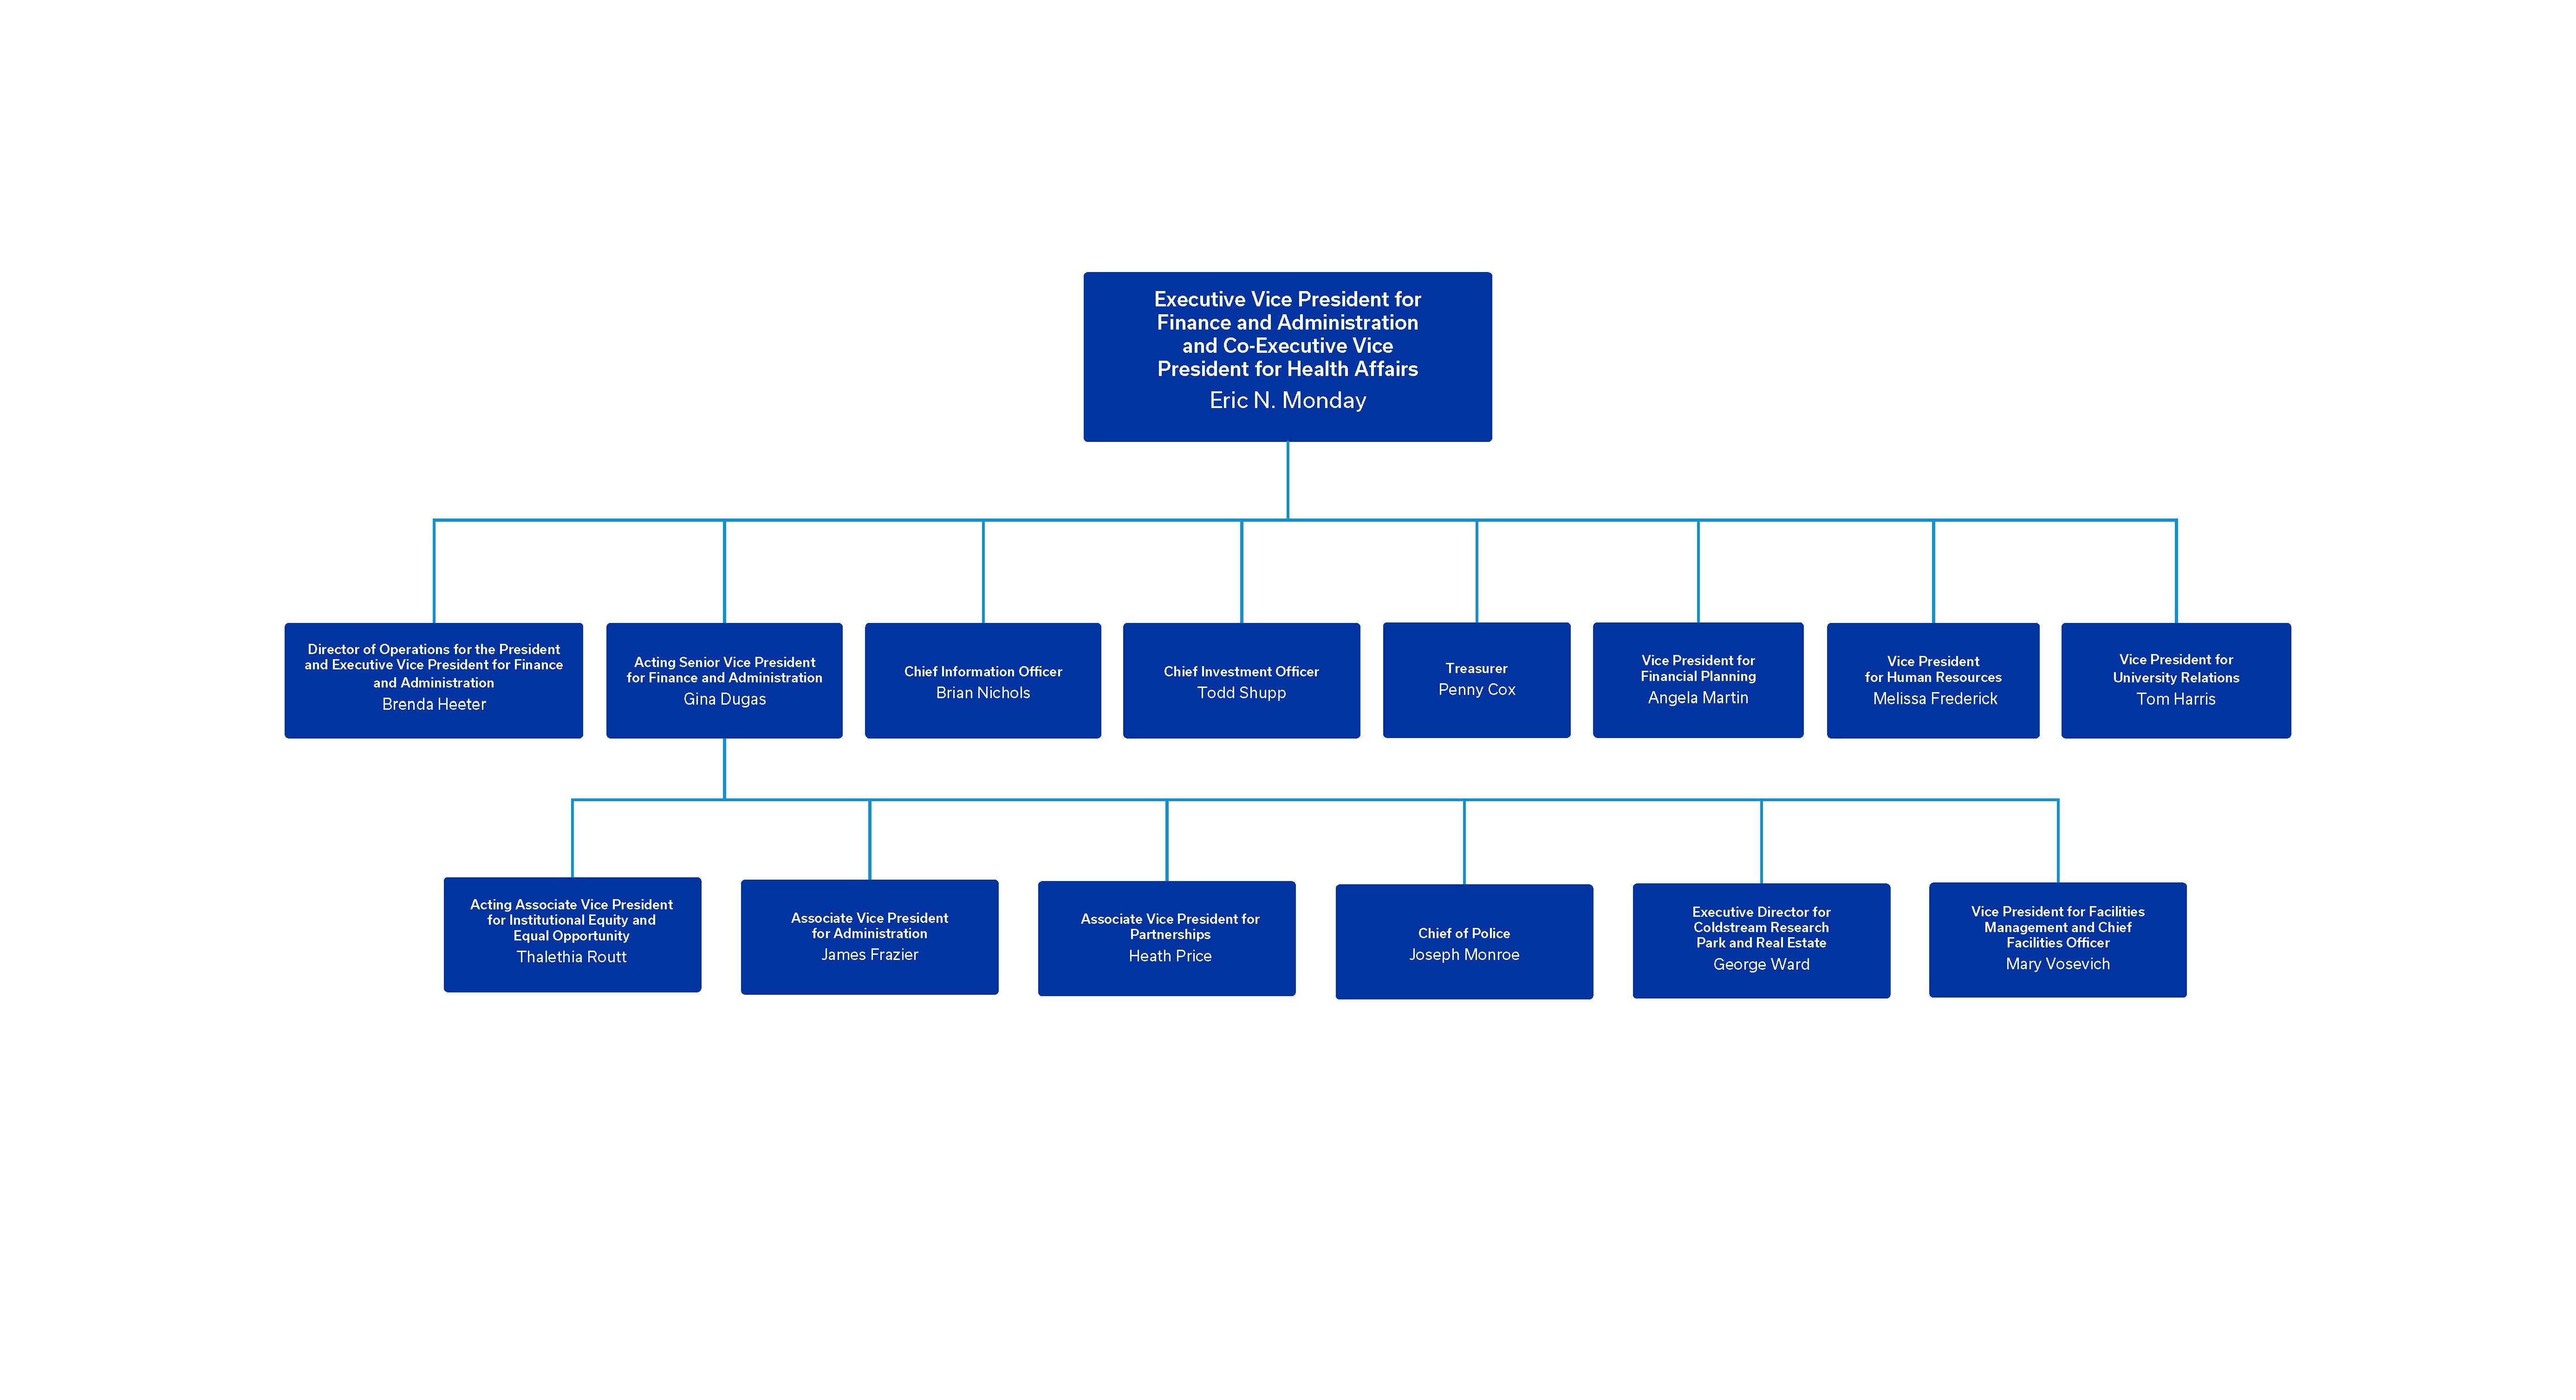 This is the EVPFA org chart.